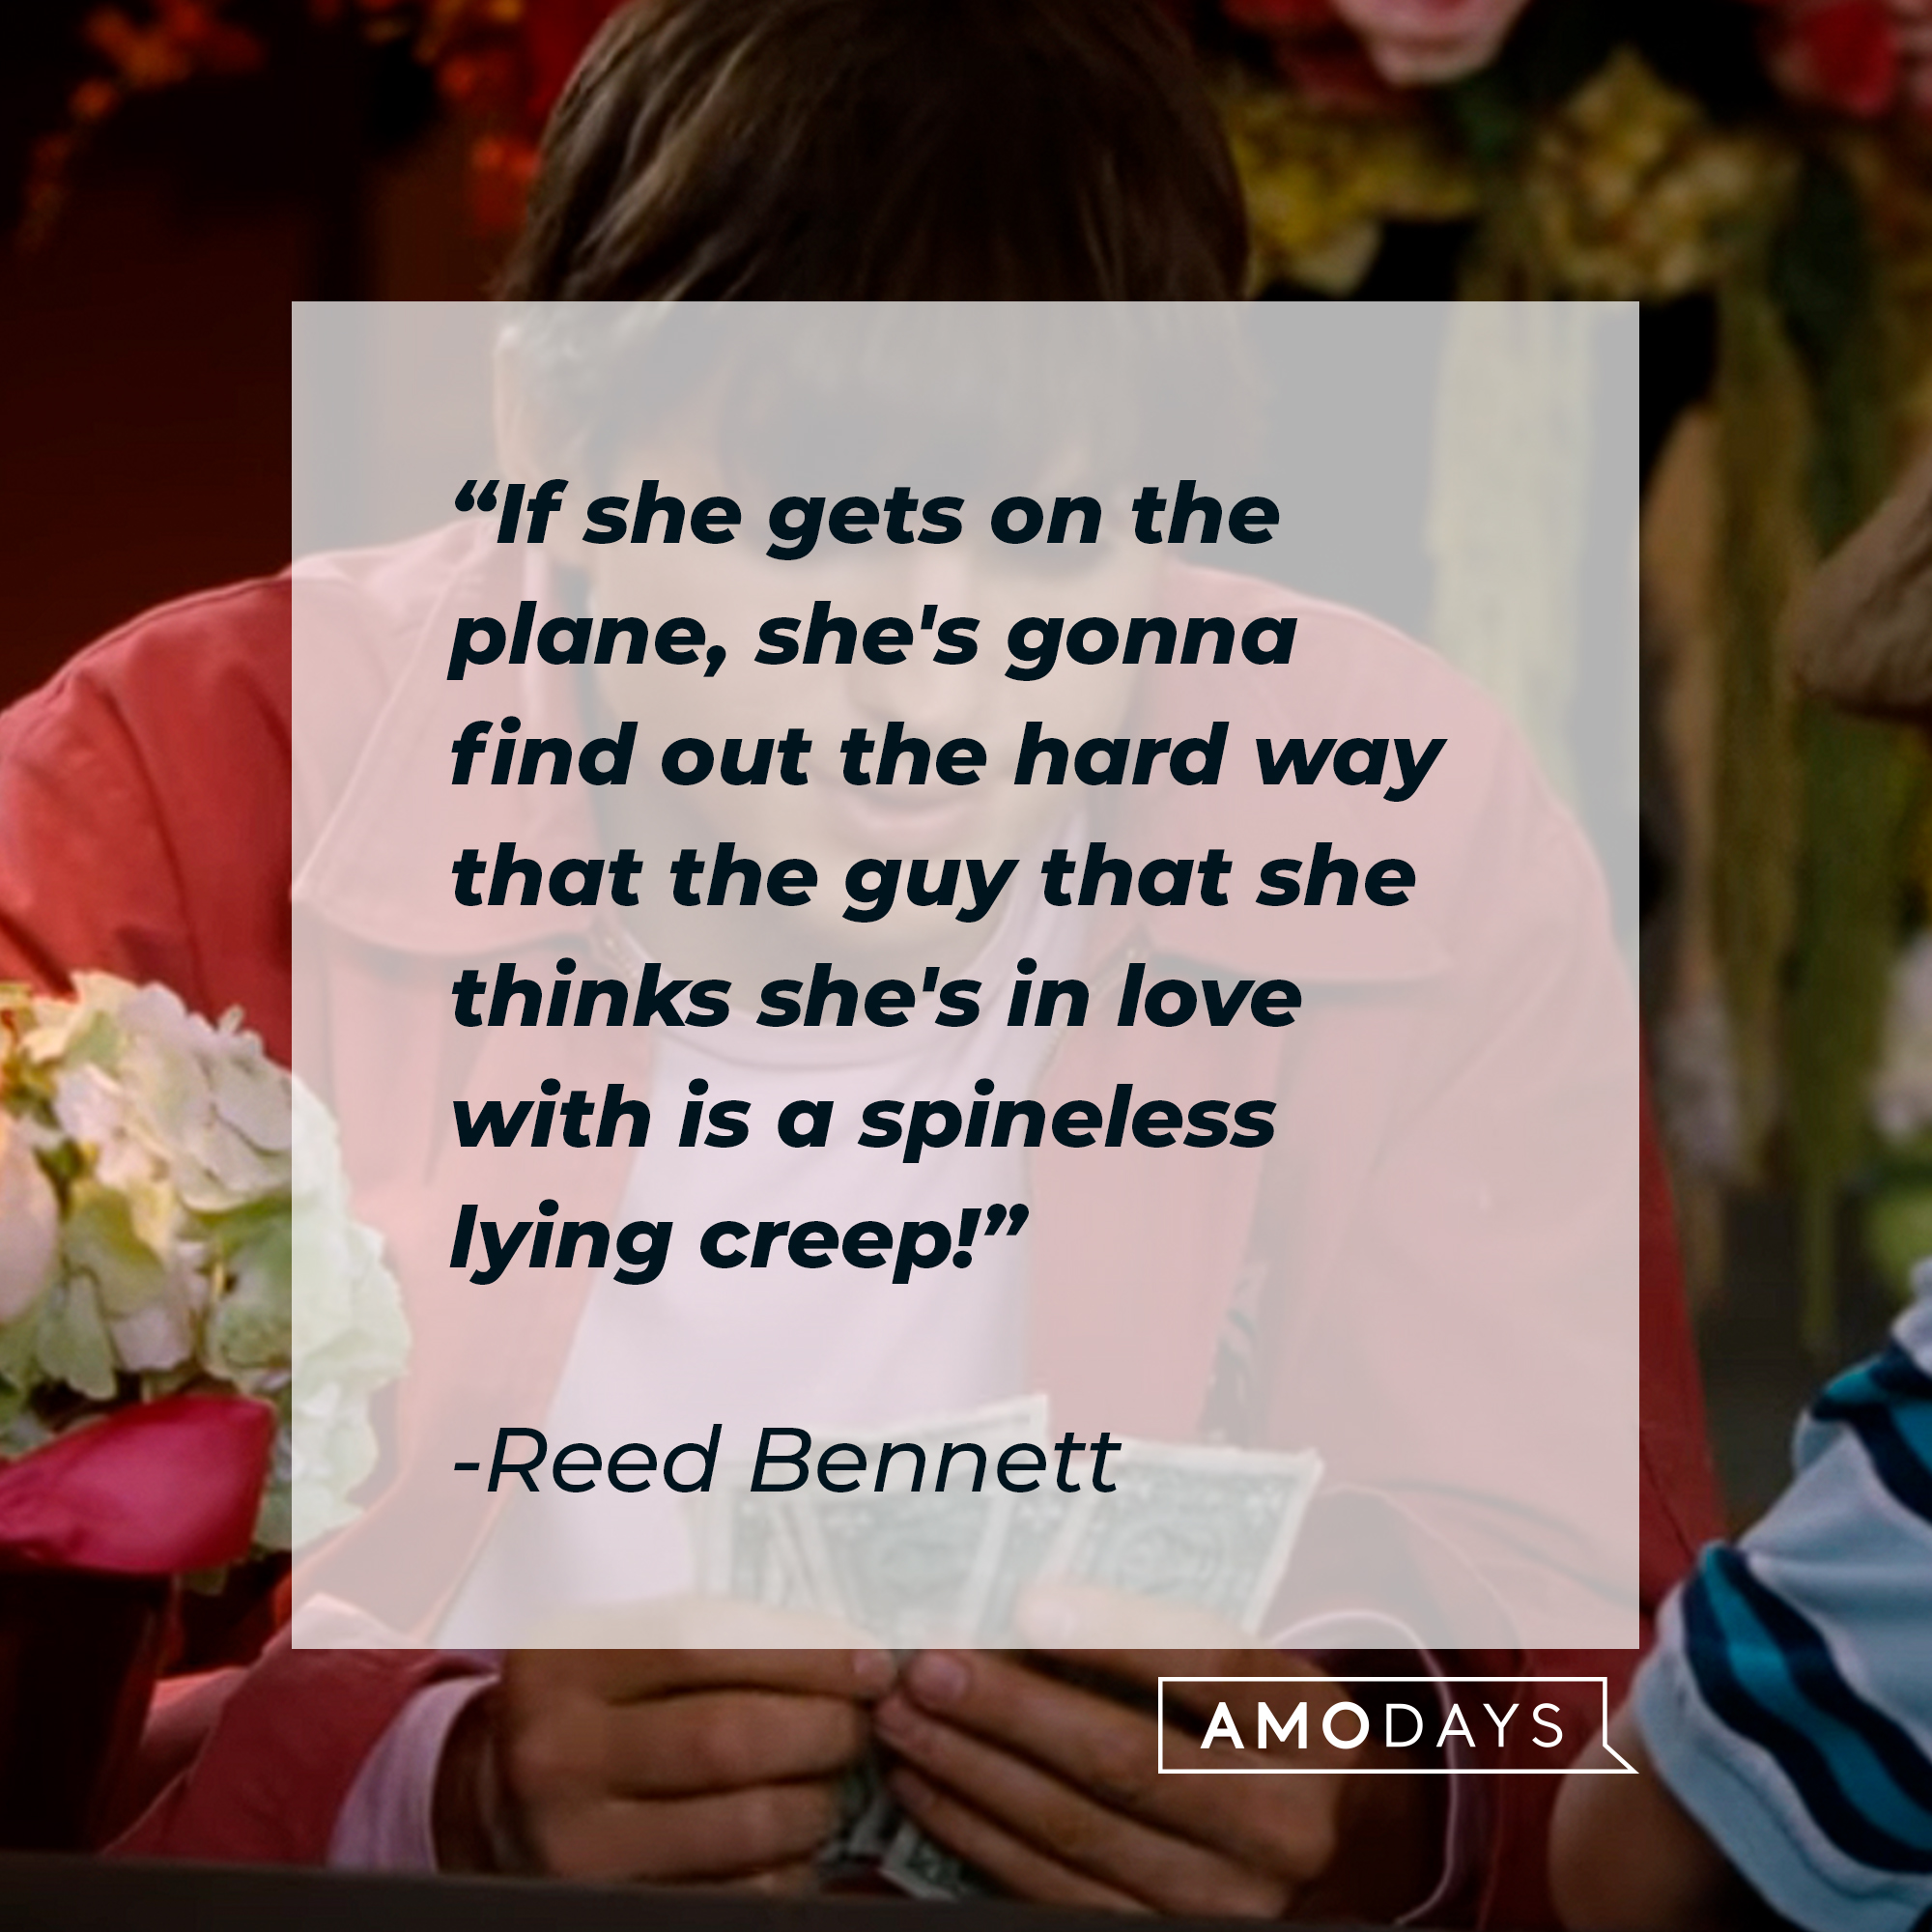 Reed Bennett's quote: "If she gets on the plane, she's gonna find out the hard way that the guy that she thinks she's in love with is a spineless lying creep!" | Source: Youtube.com/WarnerBrosPictures